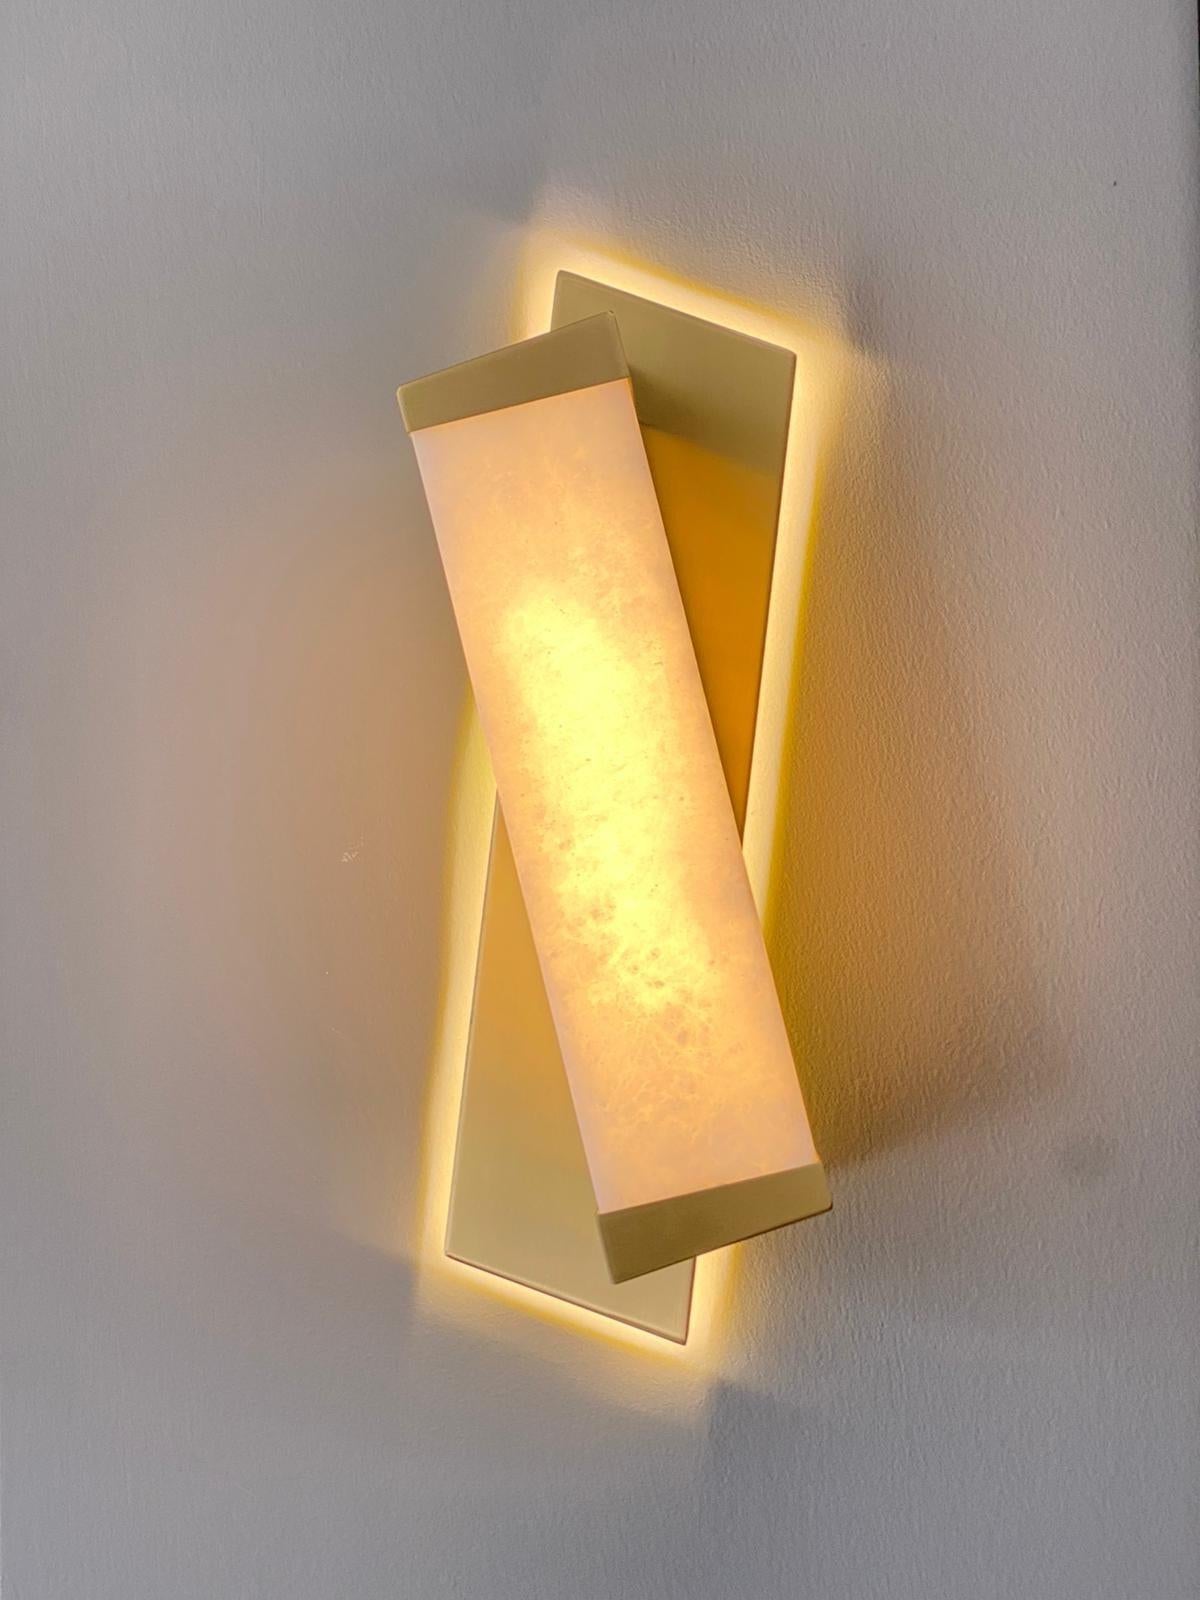 Cosulich interiors and antiques in collaboration with Matlight - Milan: this modern organic wall light, with its clean and simple geometric lines, has a very contemporary Minimalist flavor that is in strong contrast with the traditional materials